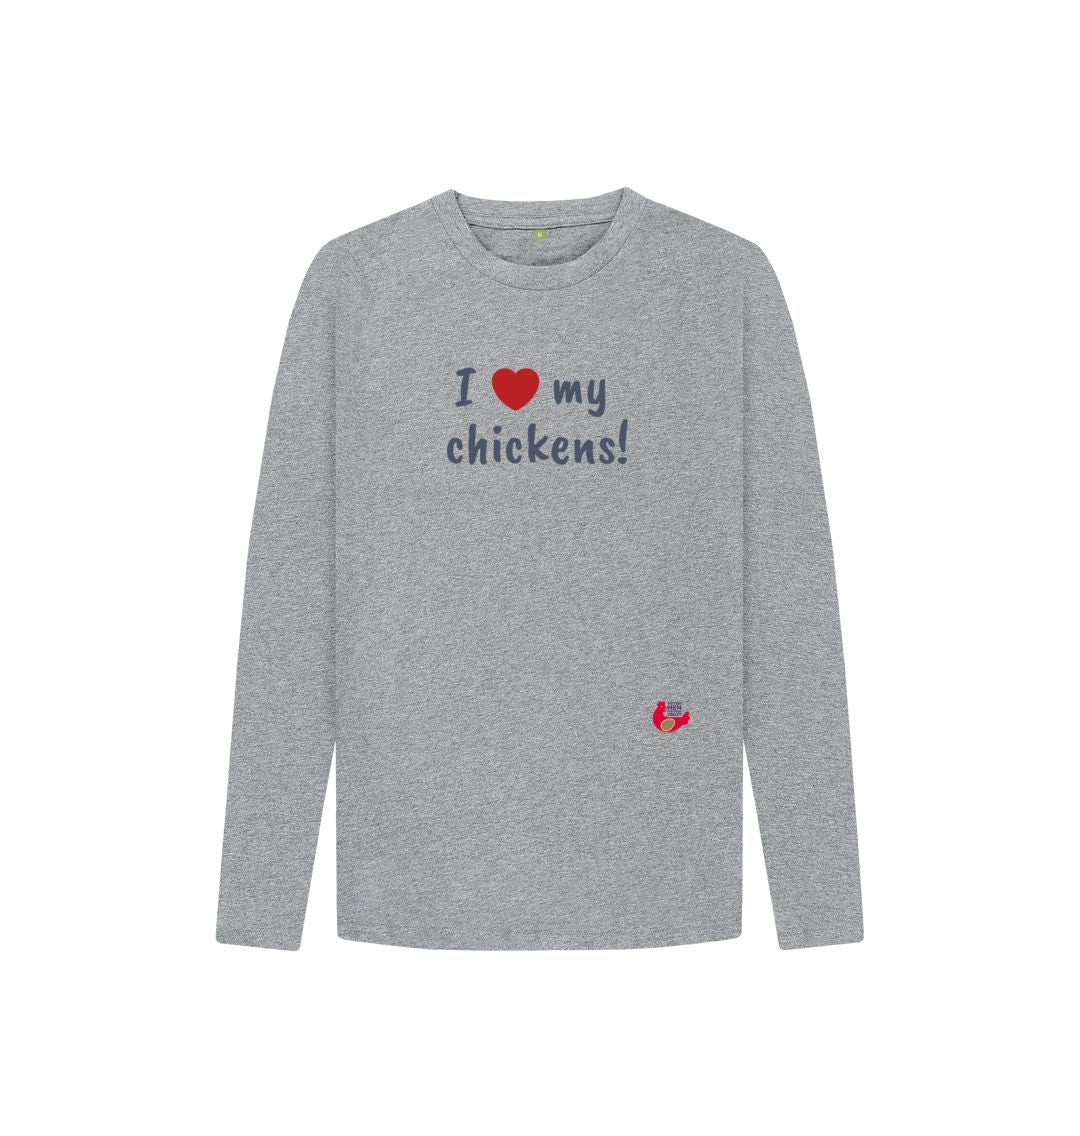 Athletic Grey I 'love' my chickens! Kids Unisex Long Sleeve T-Shirt